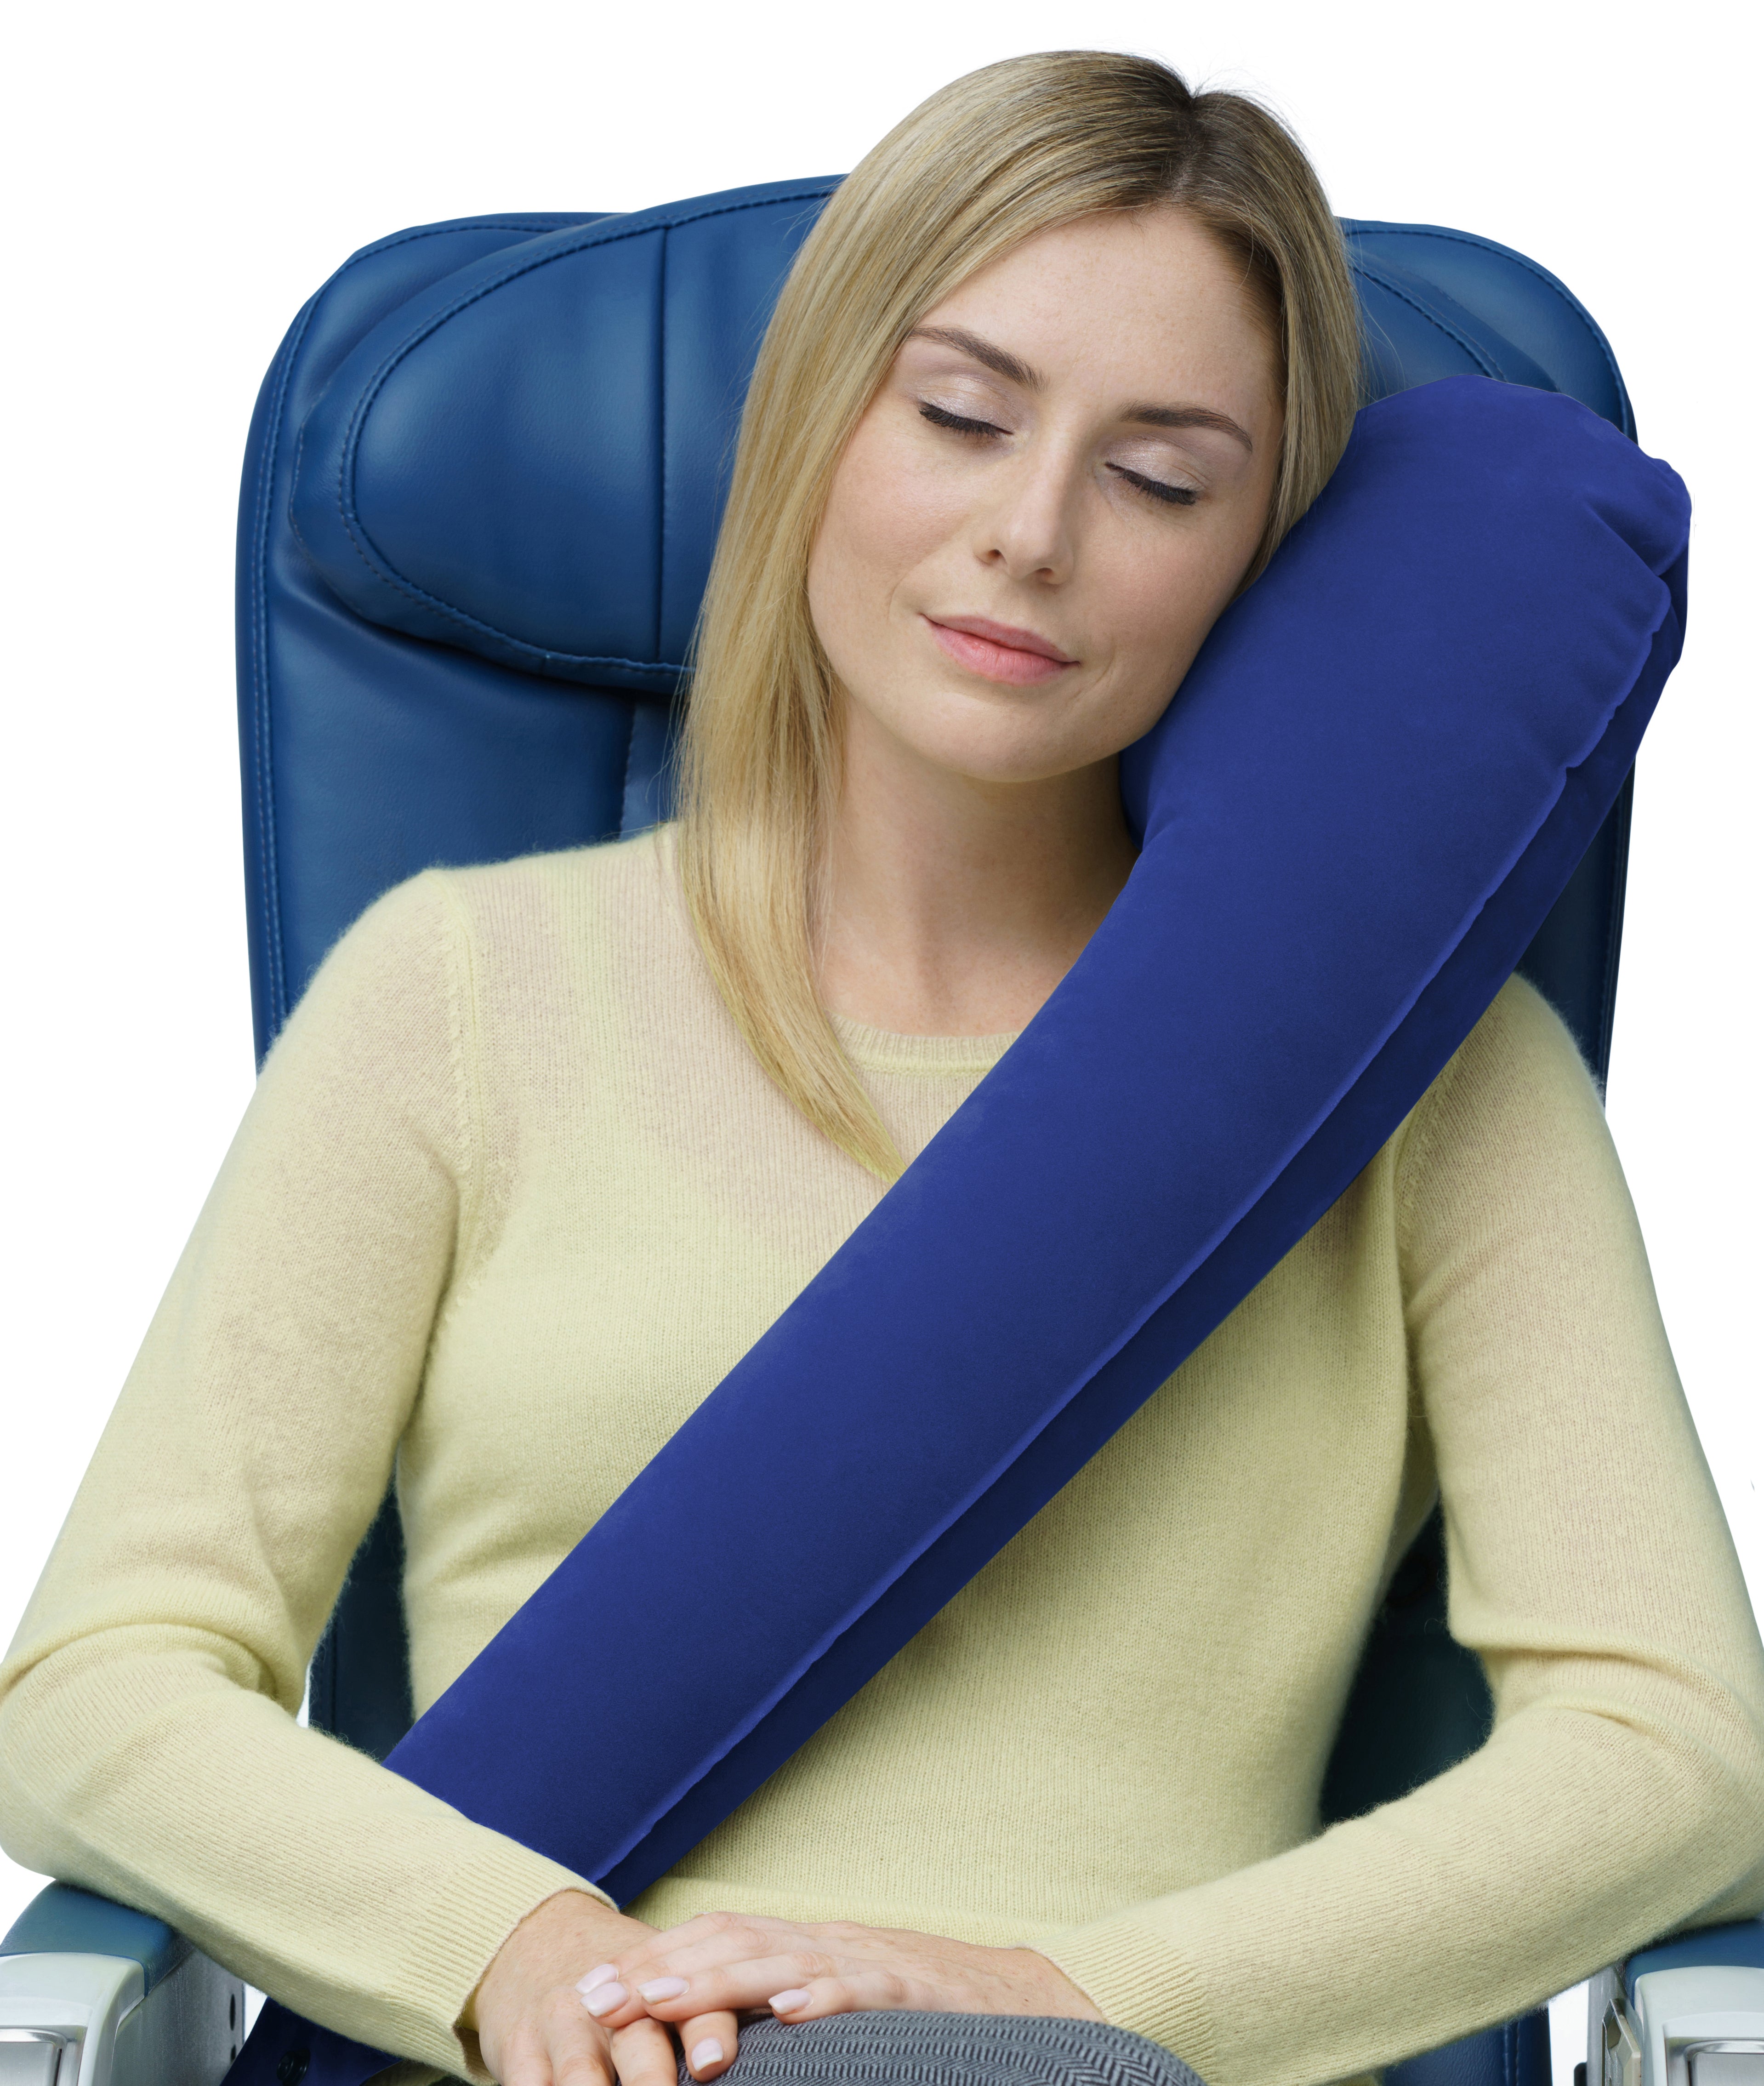 inflatable front travel pillow review